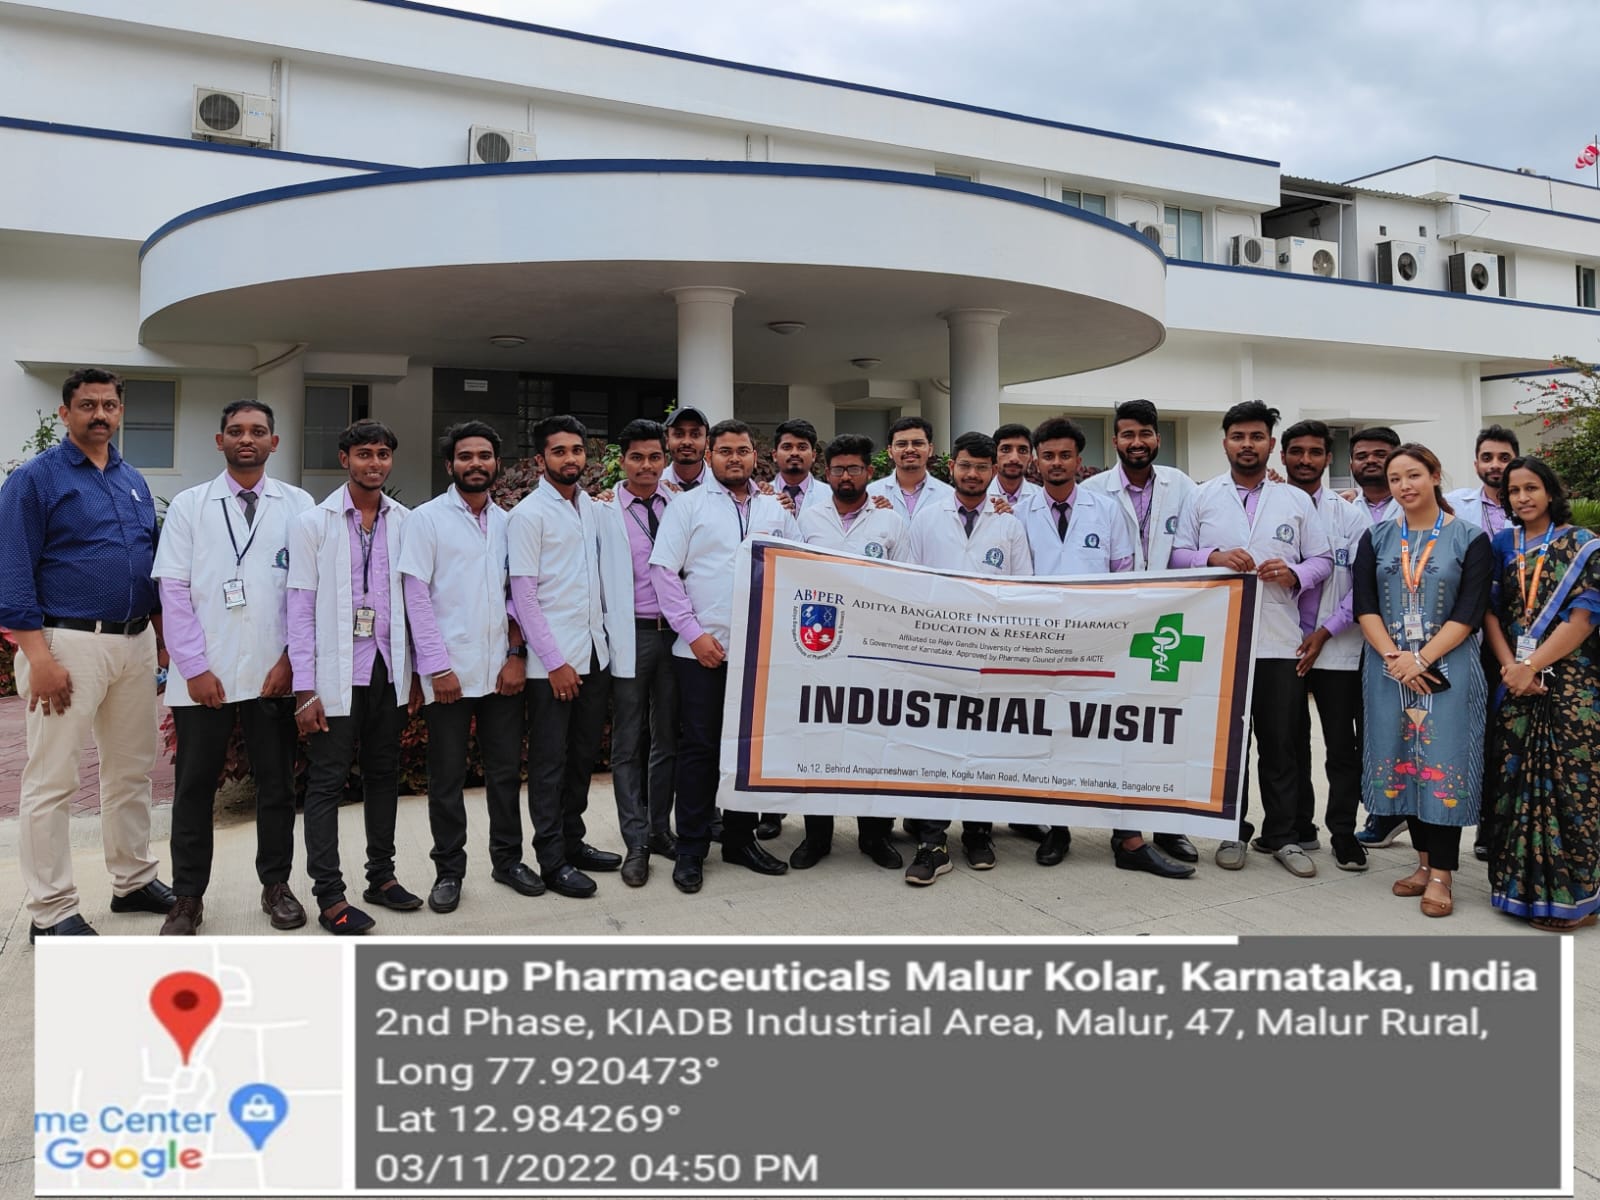 Industrial Visit to Group Pharmaceuticals Ltd.